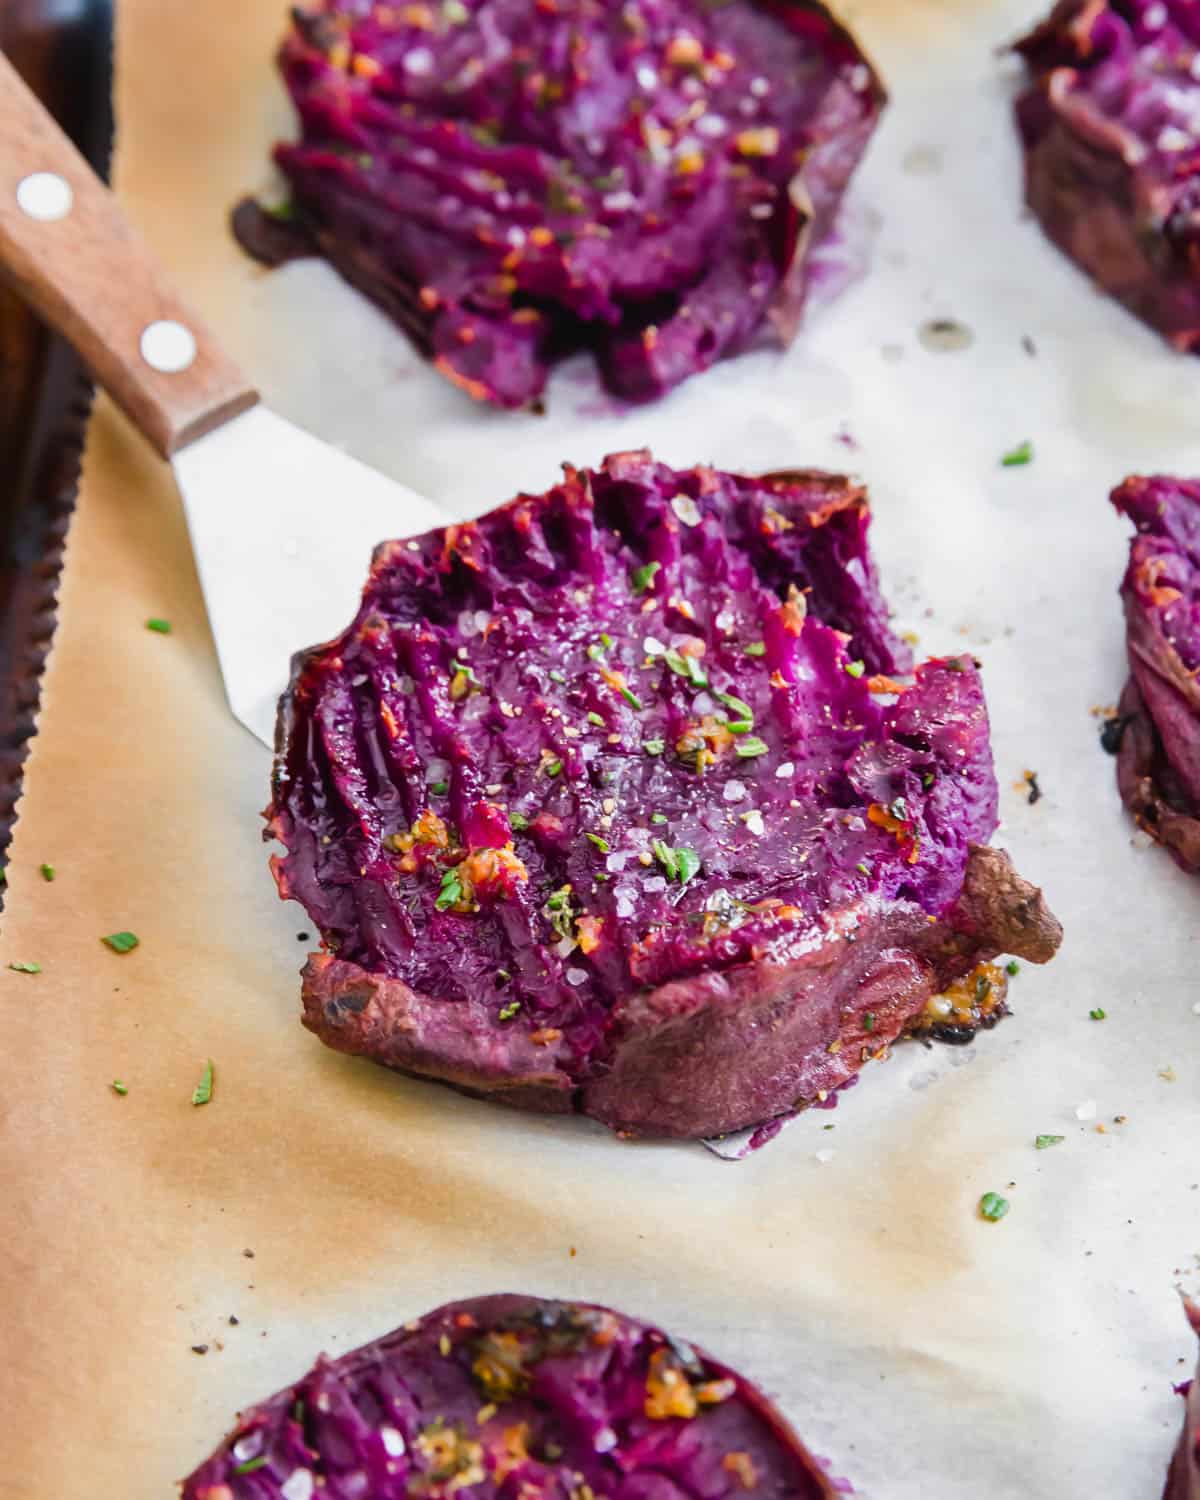 Crispy roasted purple sweet potatoes with melted butter and herbs.